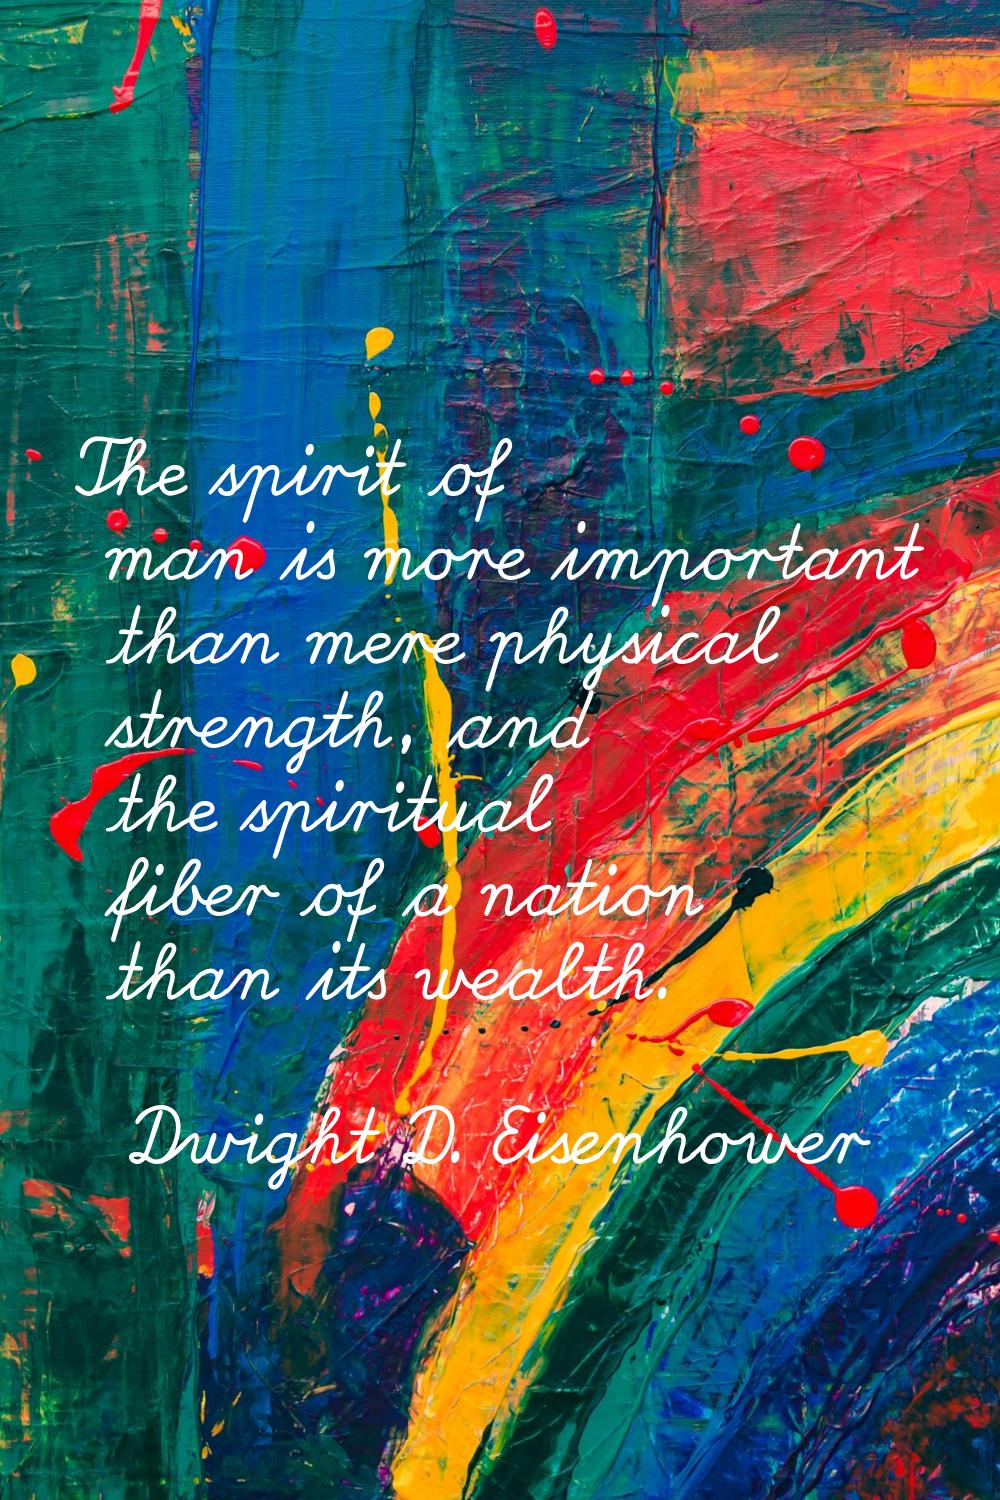 The spirit of man is more important than mere physical strength, and the spiritual fiber of a natio